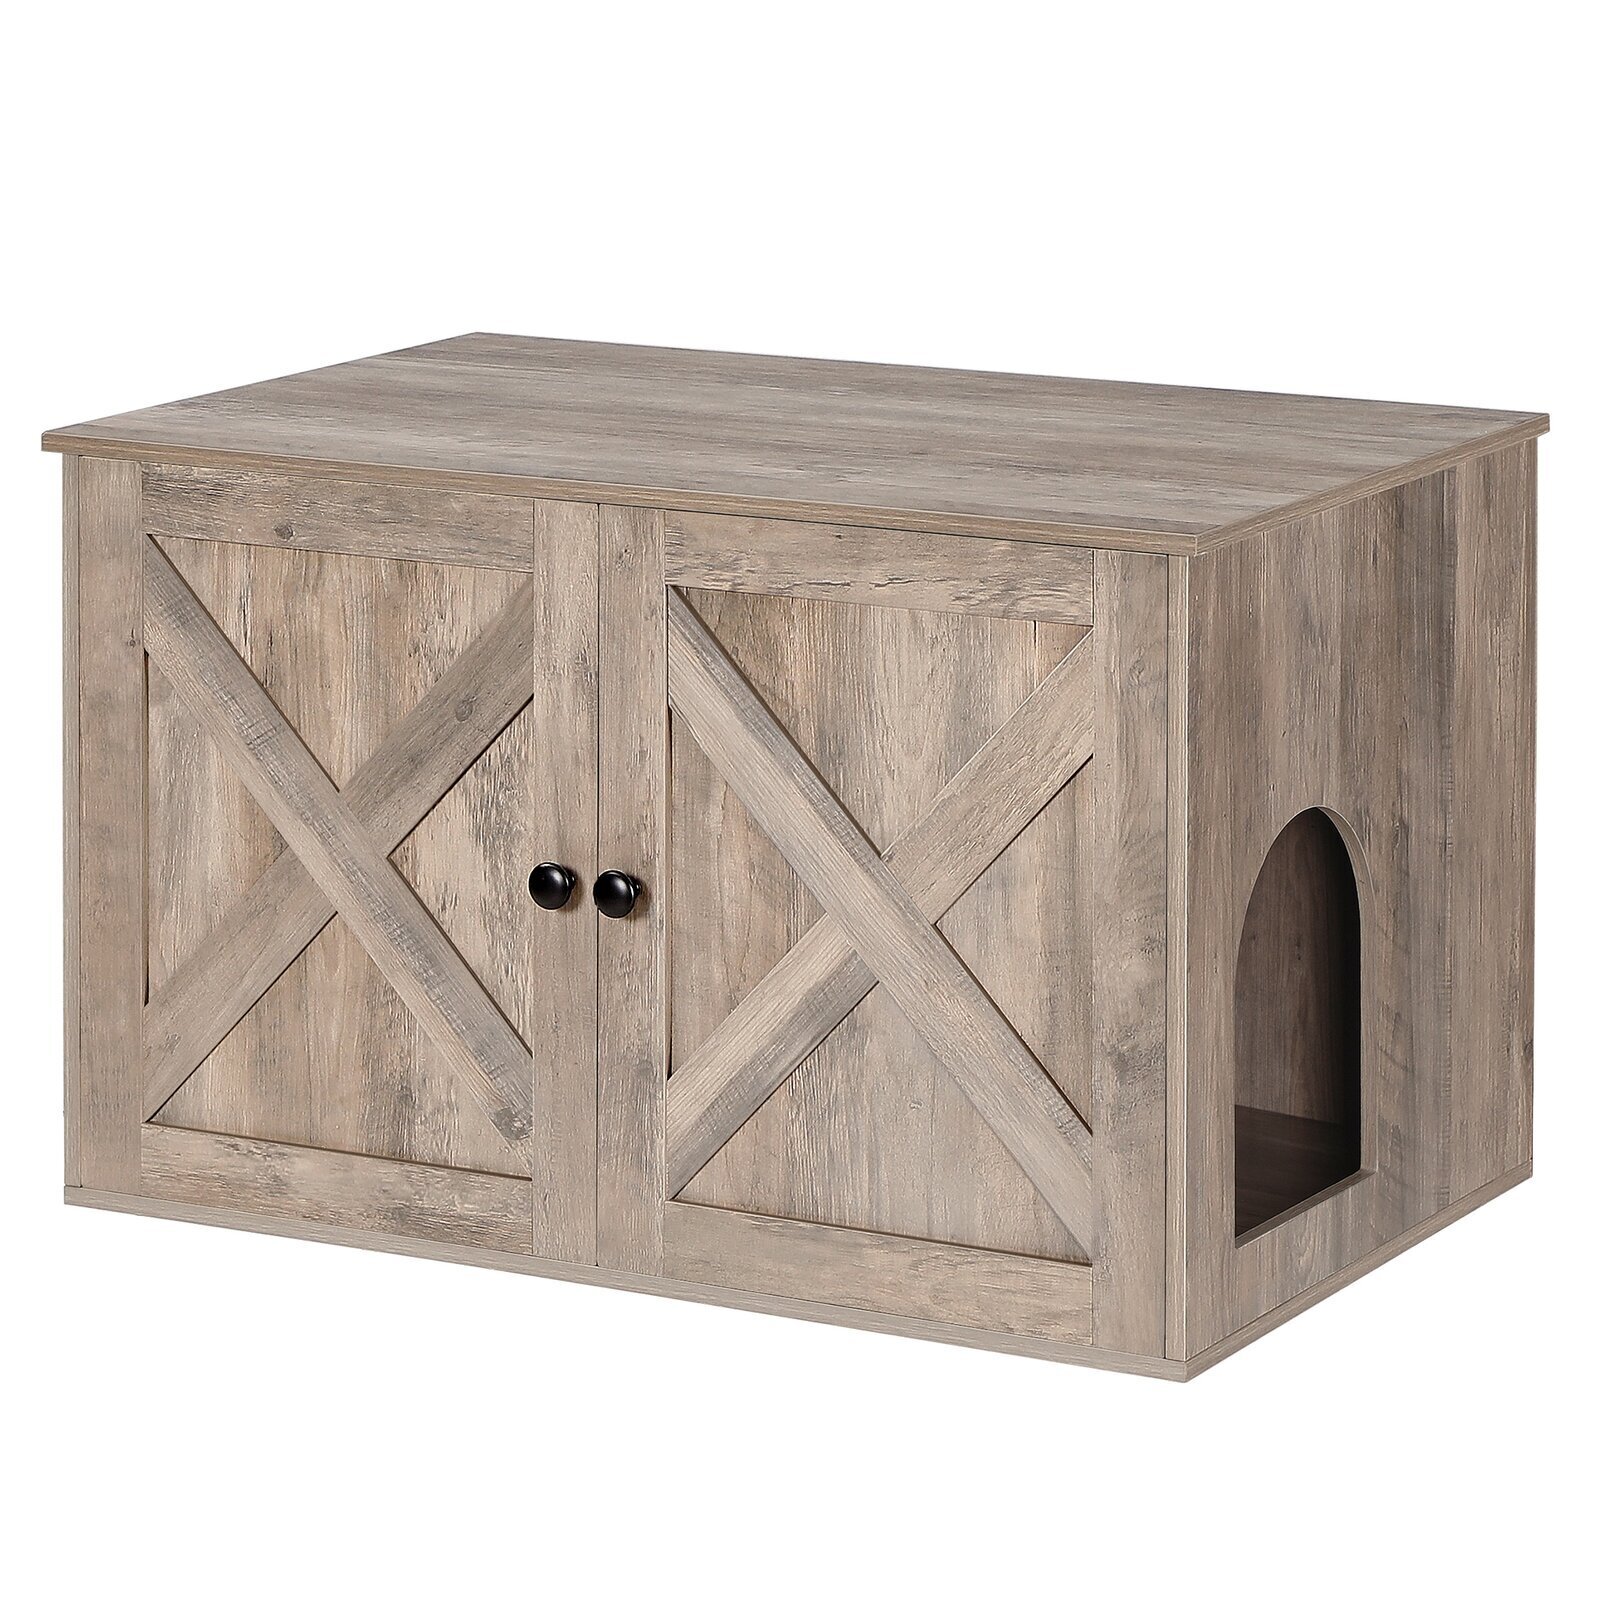 Farmhouse inspired cat litter box furniture for large cats